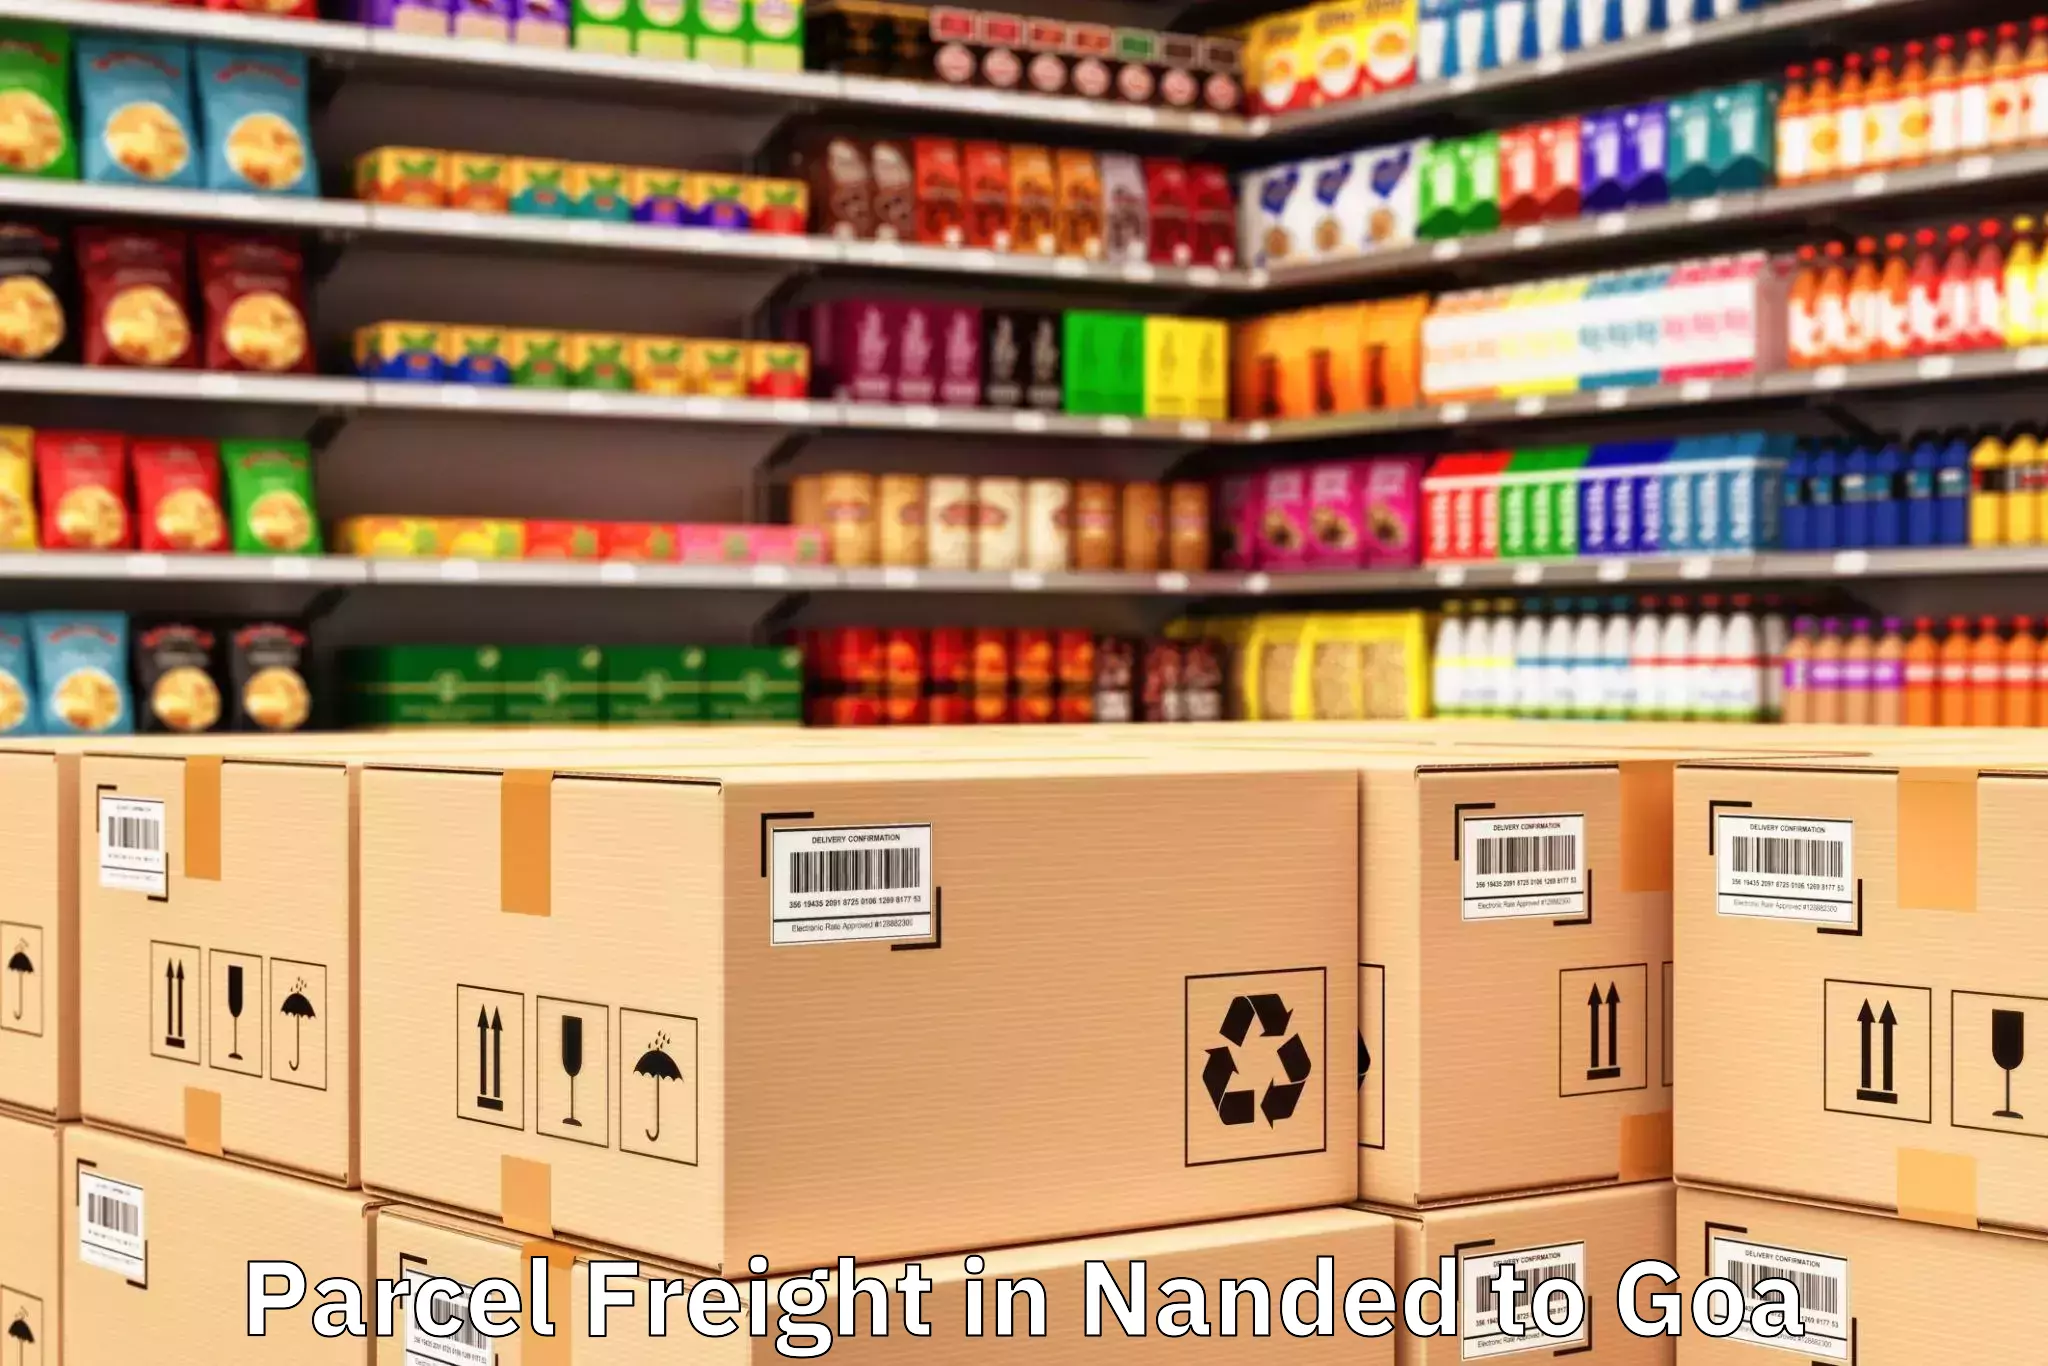 Professional Nanded to Goa Parcel Freight